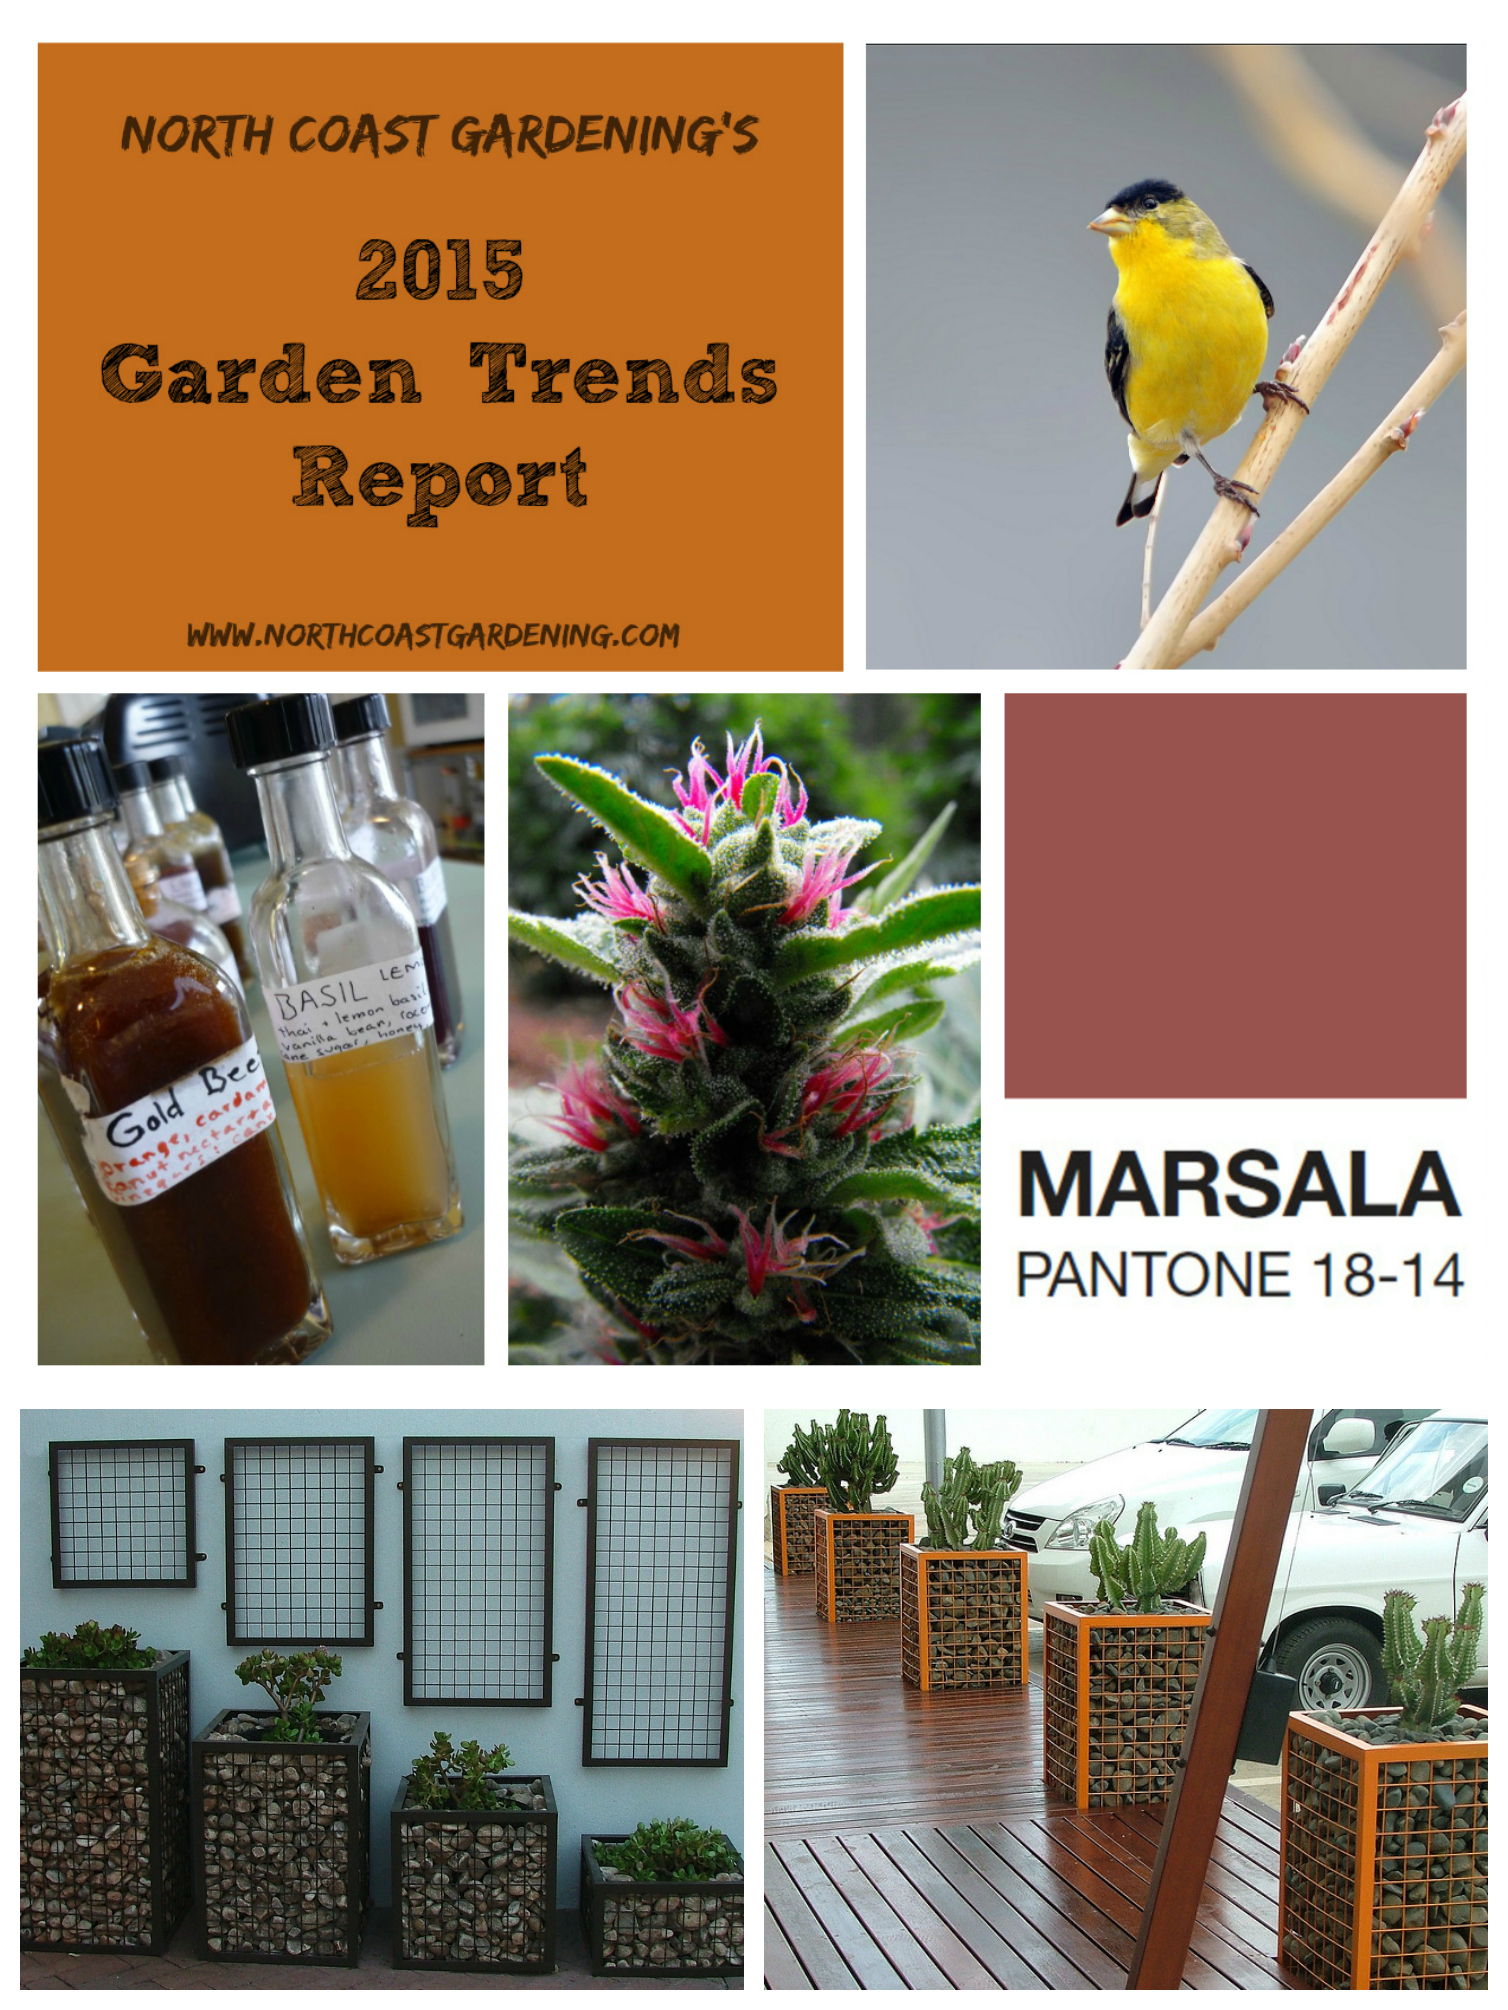 North Coast Gardening's 2015 Annual Garden Trends Report - gabion walls, native plant and other meaningful gardening, nonalcoholic botanical cocktails, ornamental weed, and more! www.northcoastgardening.com